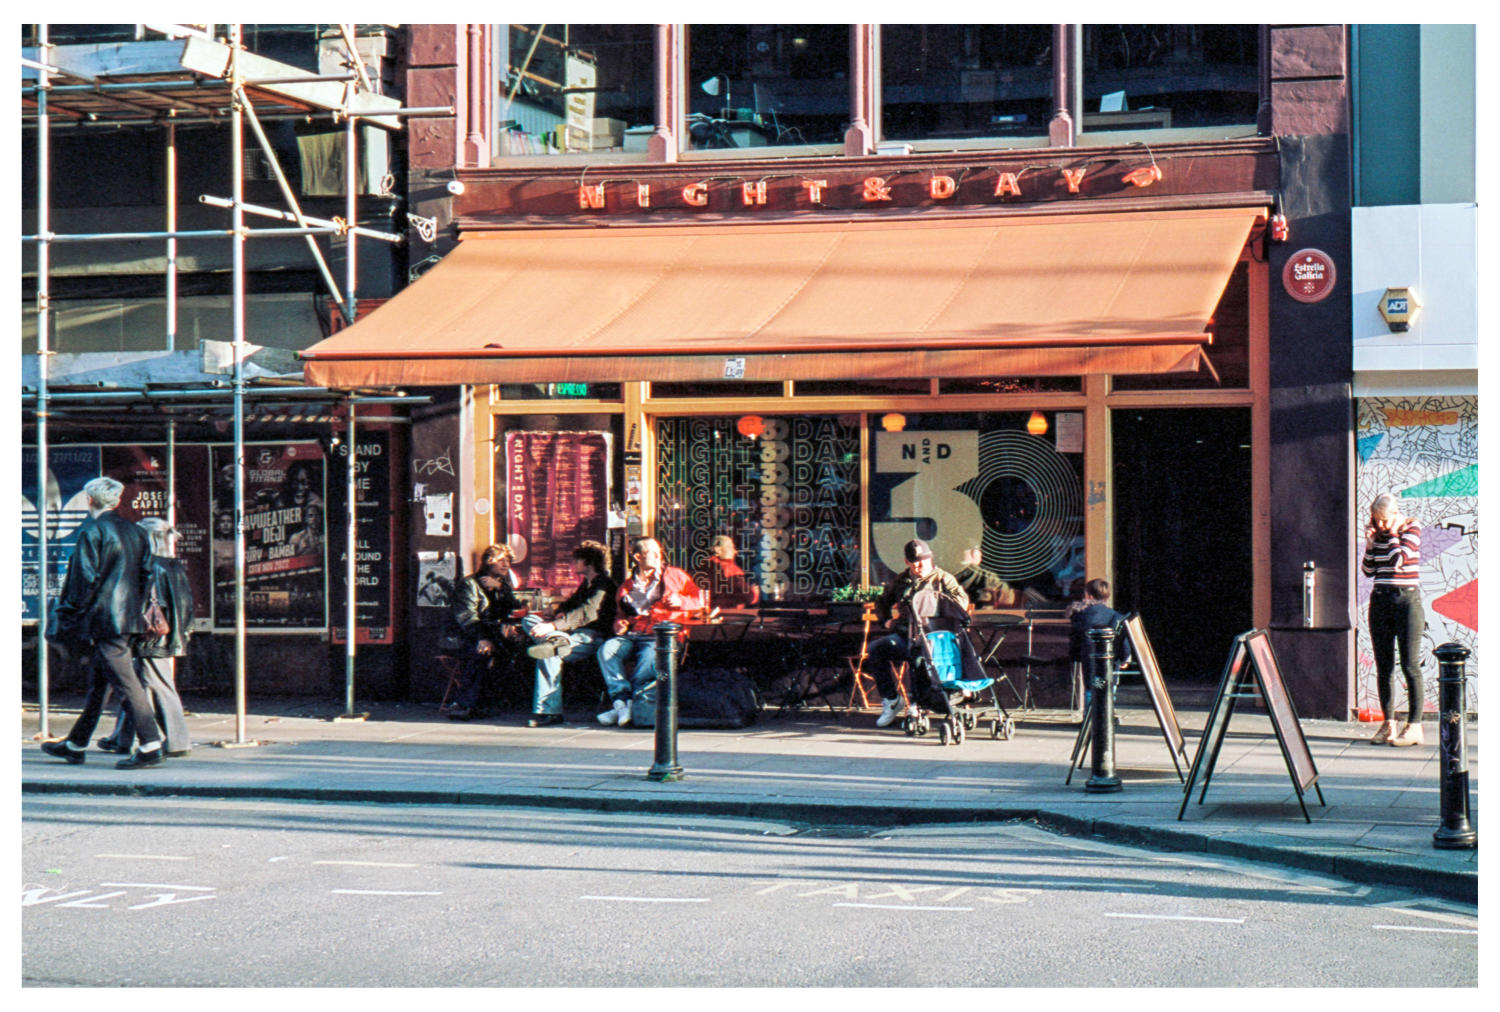 A view from across the street of the Night and Day Café, with people sitting at tables outside